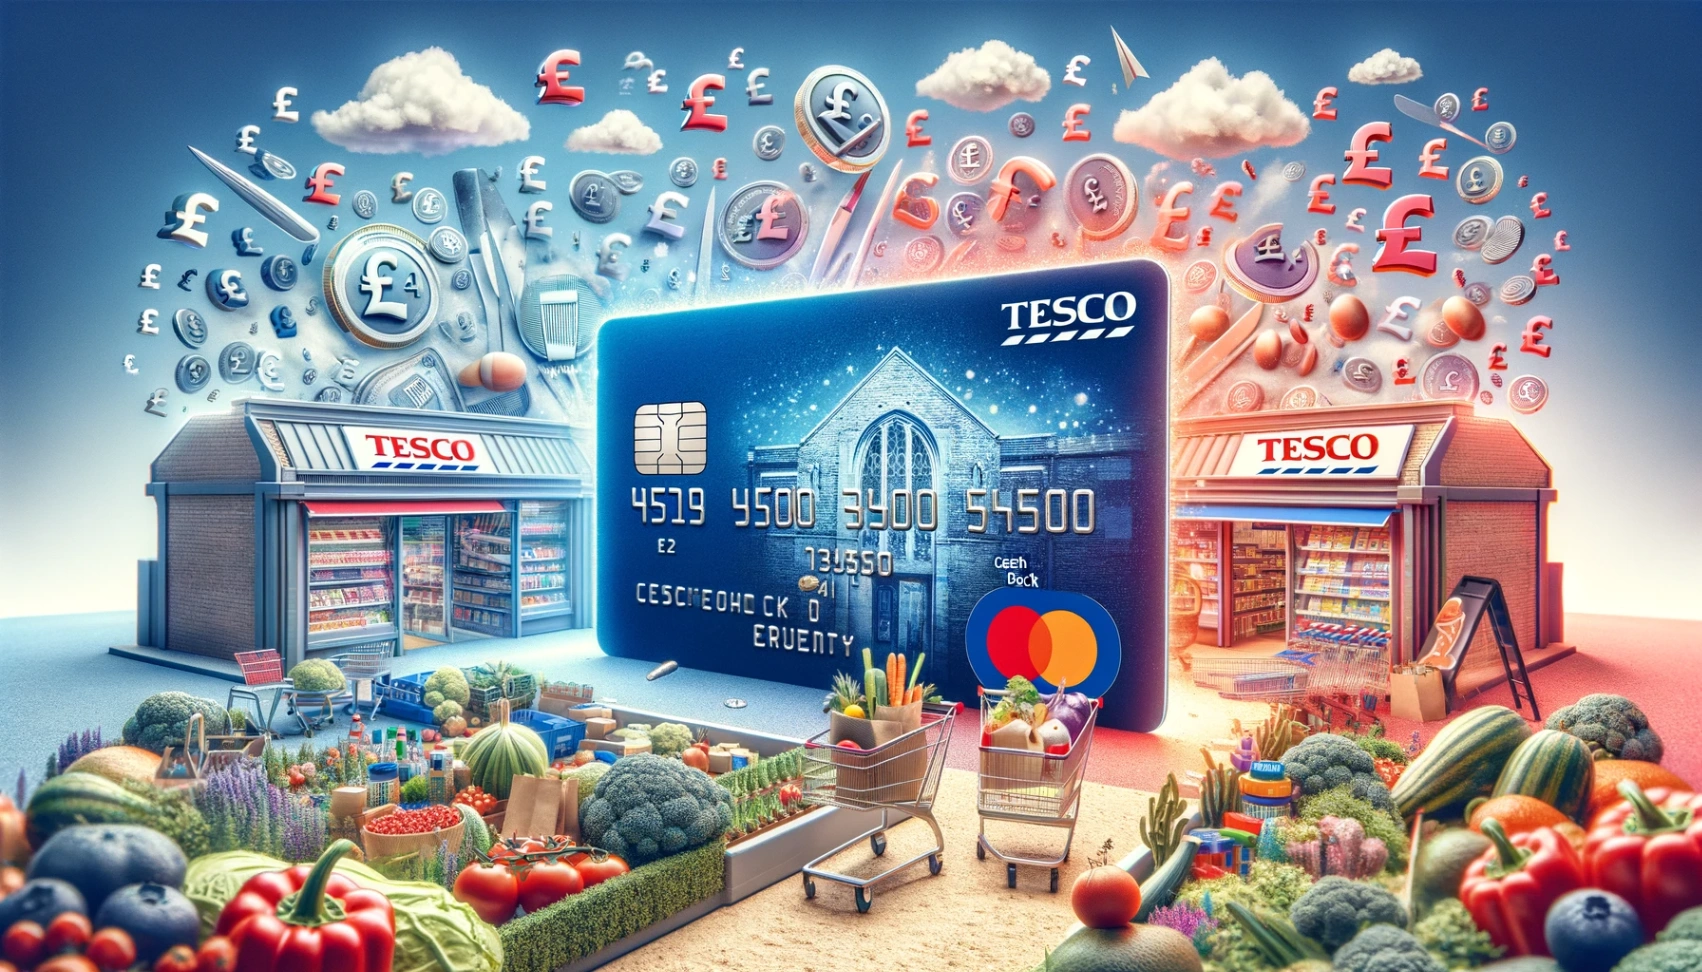 Tesco Bank Credit Card Application: An Easy-to-Follow Online Guide